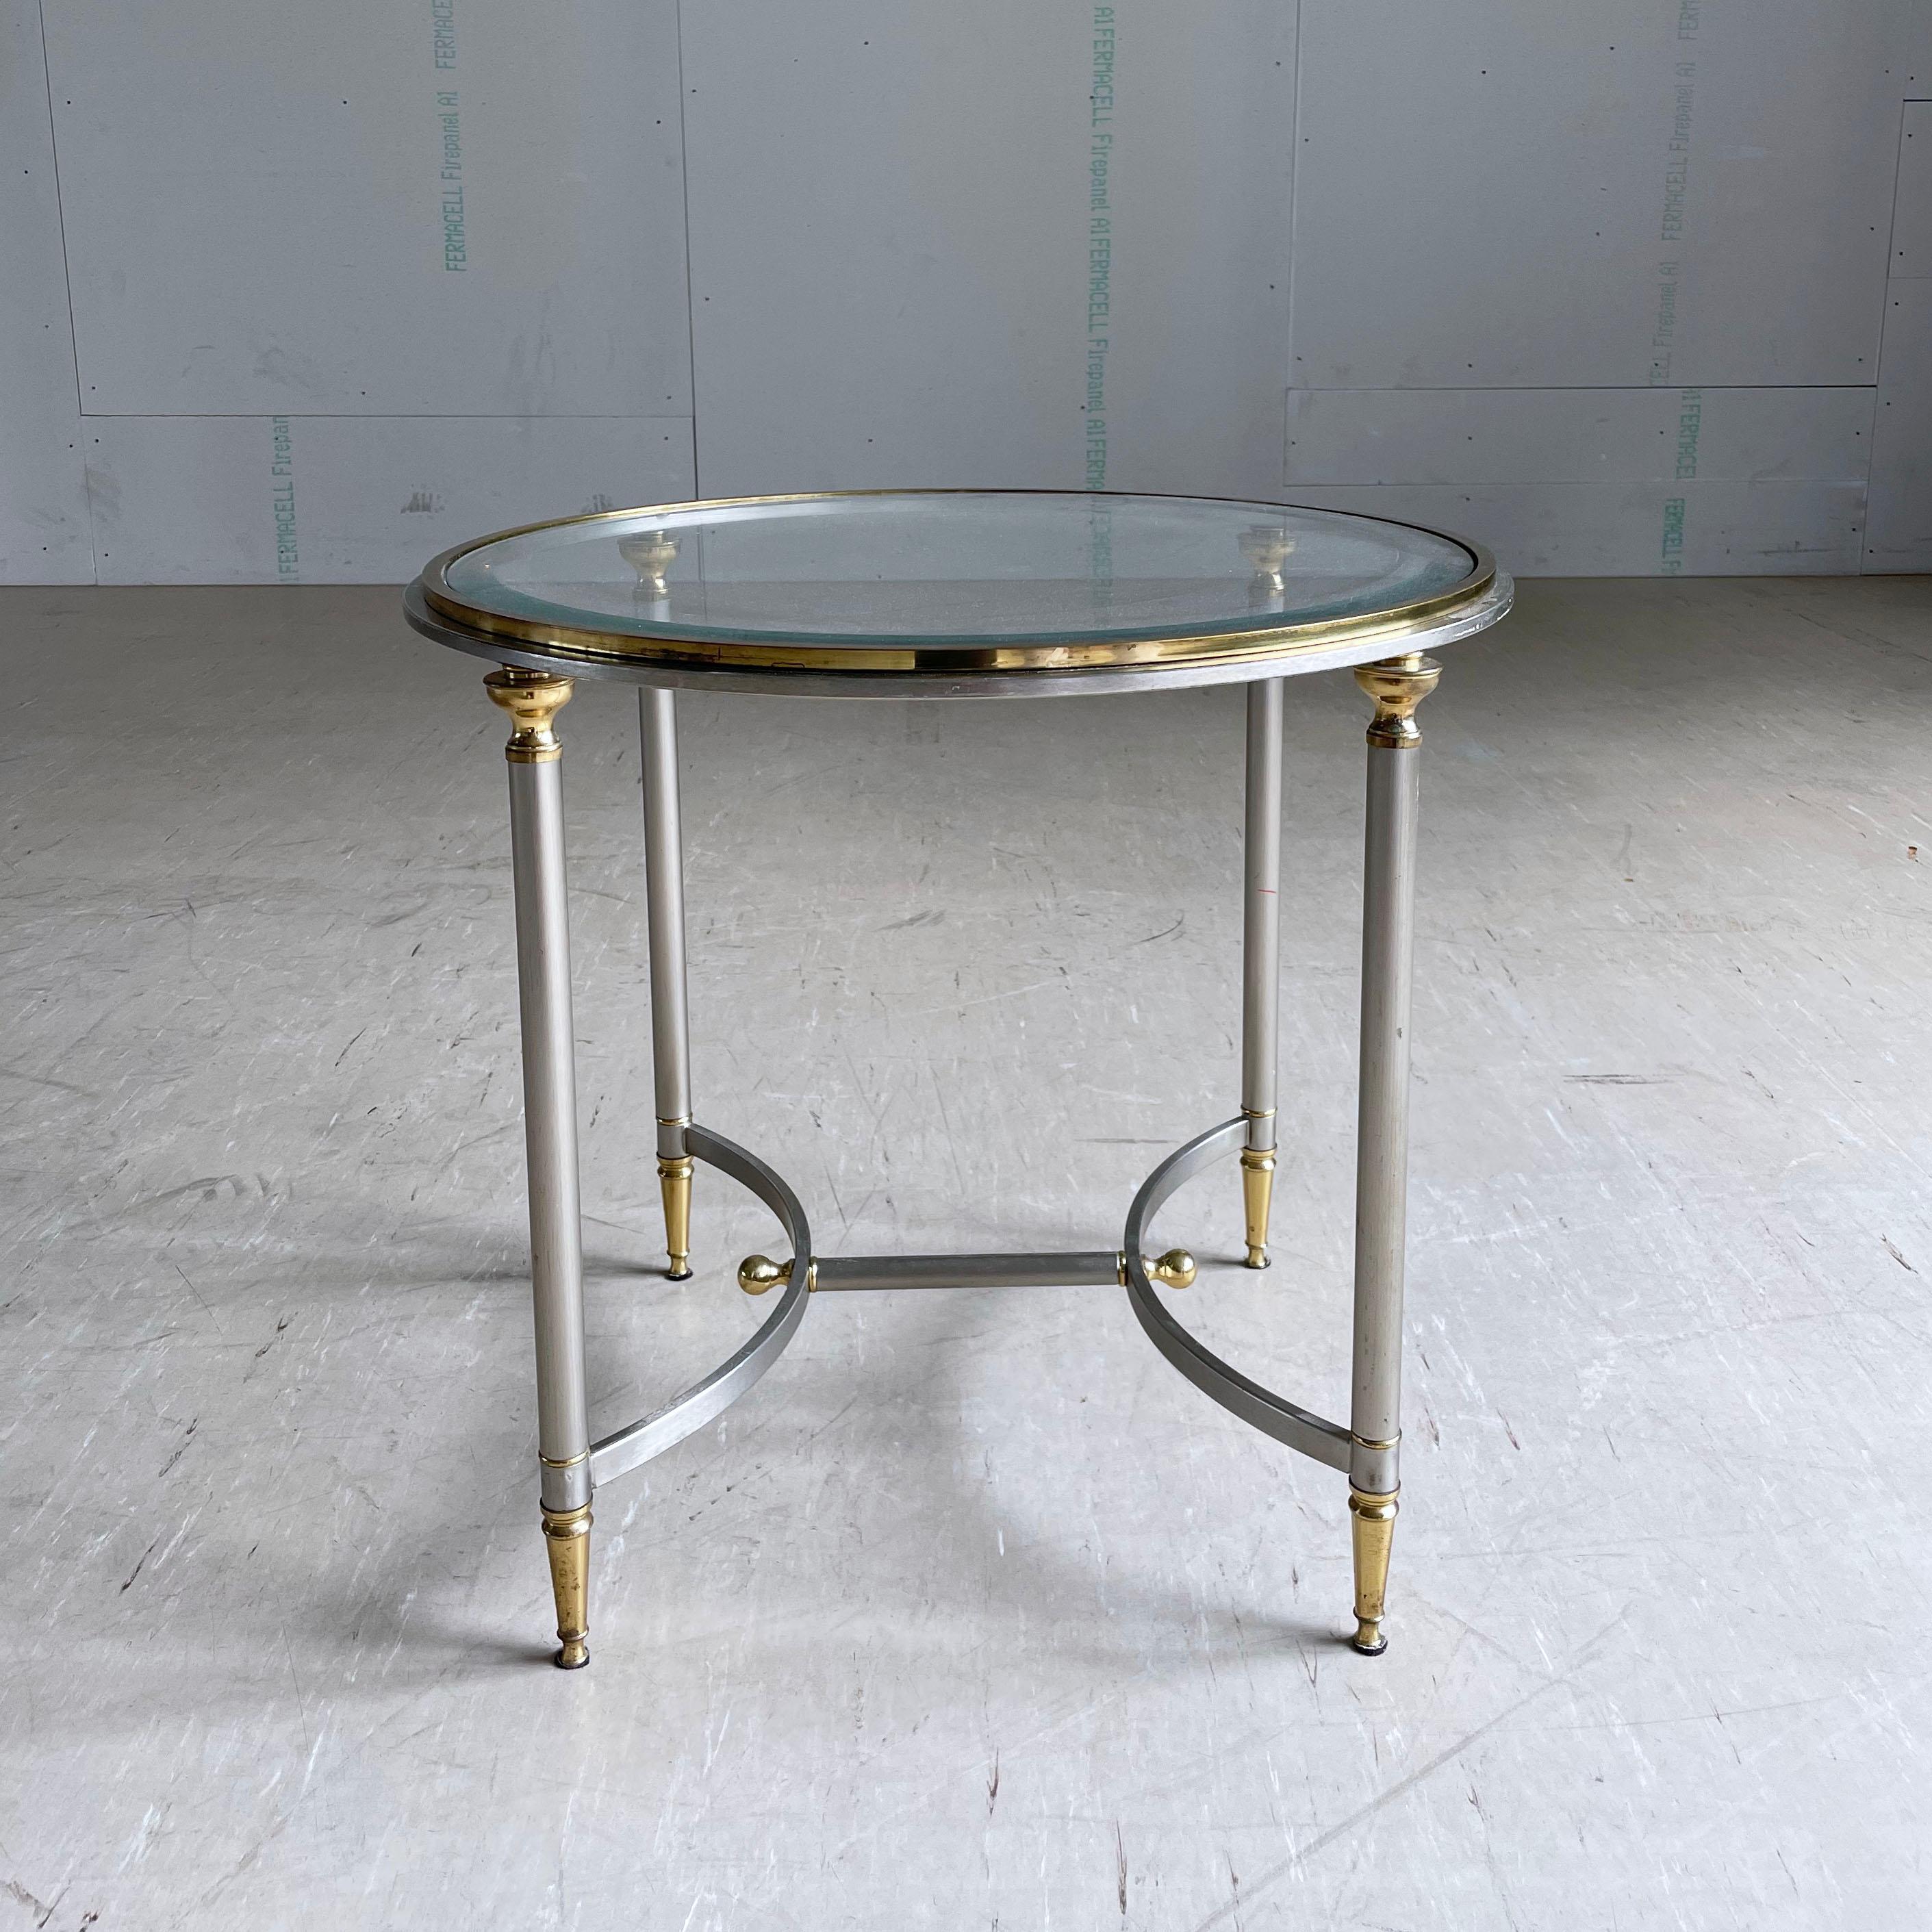 Vintage Hollywood Regency brushed steel & brass side table with glass plate. In the style of Maison Jansen. Originates from Hotel Jungfrau, Interlaken, Switzerland.